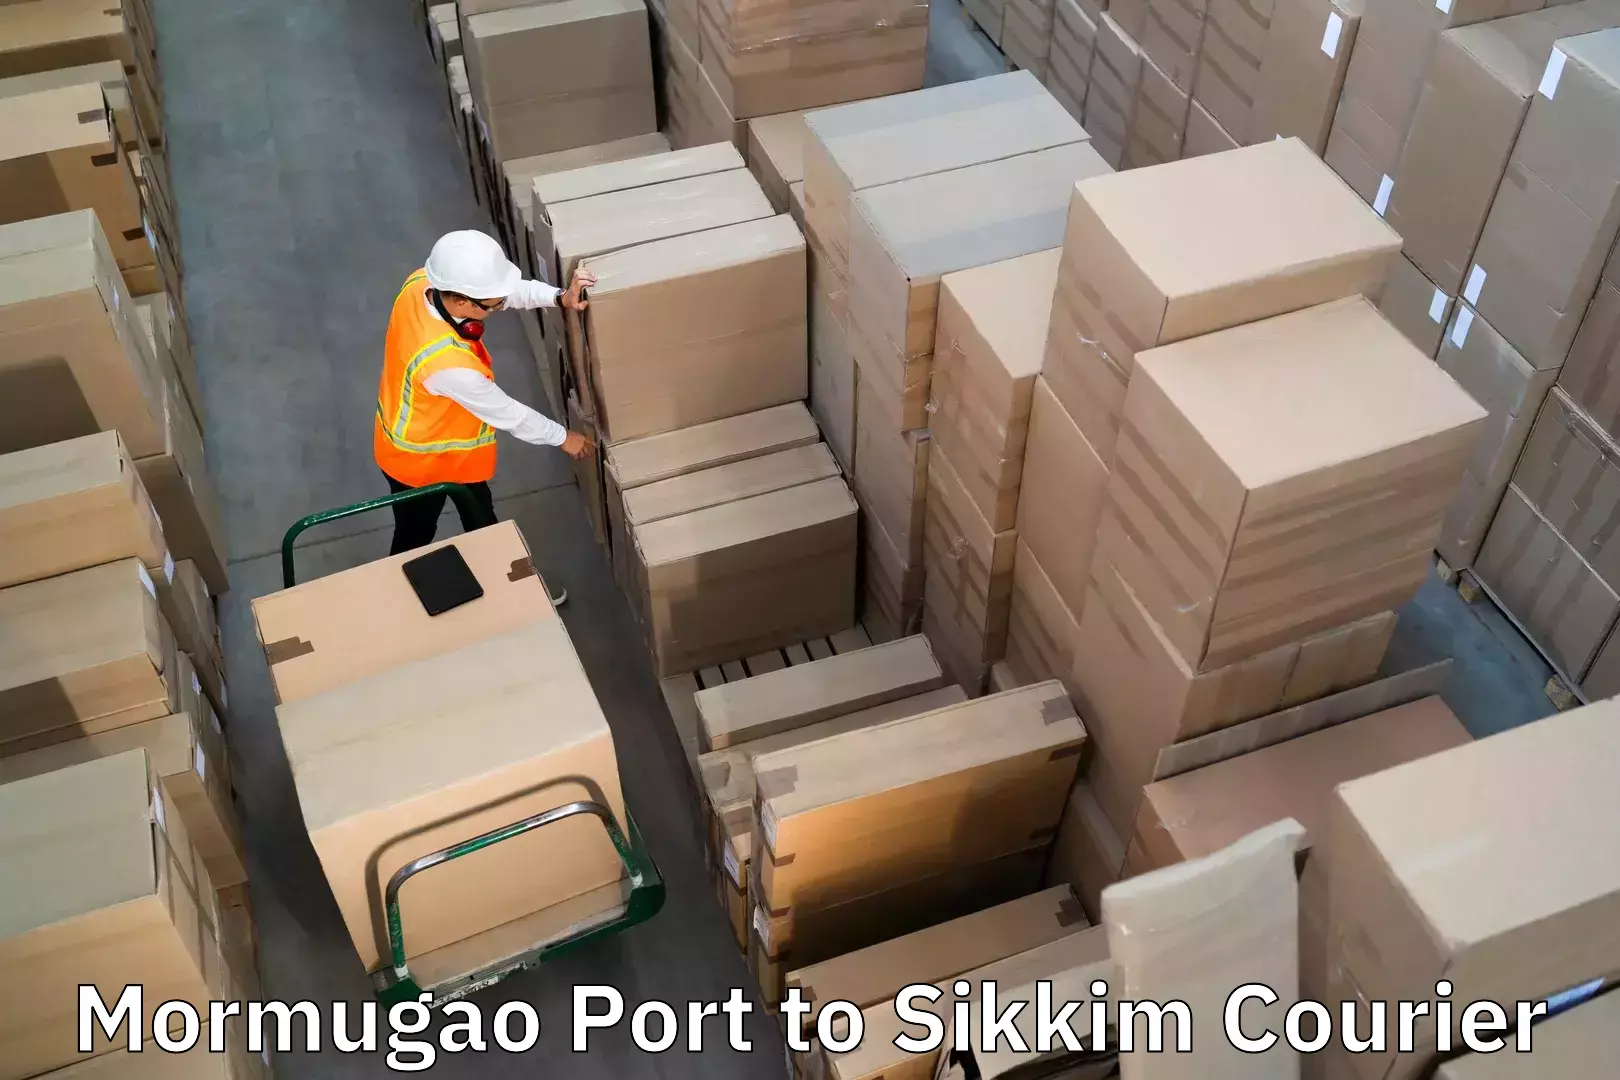 Express luggage delivery Mormugao Port to Sikkim